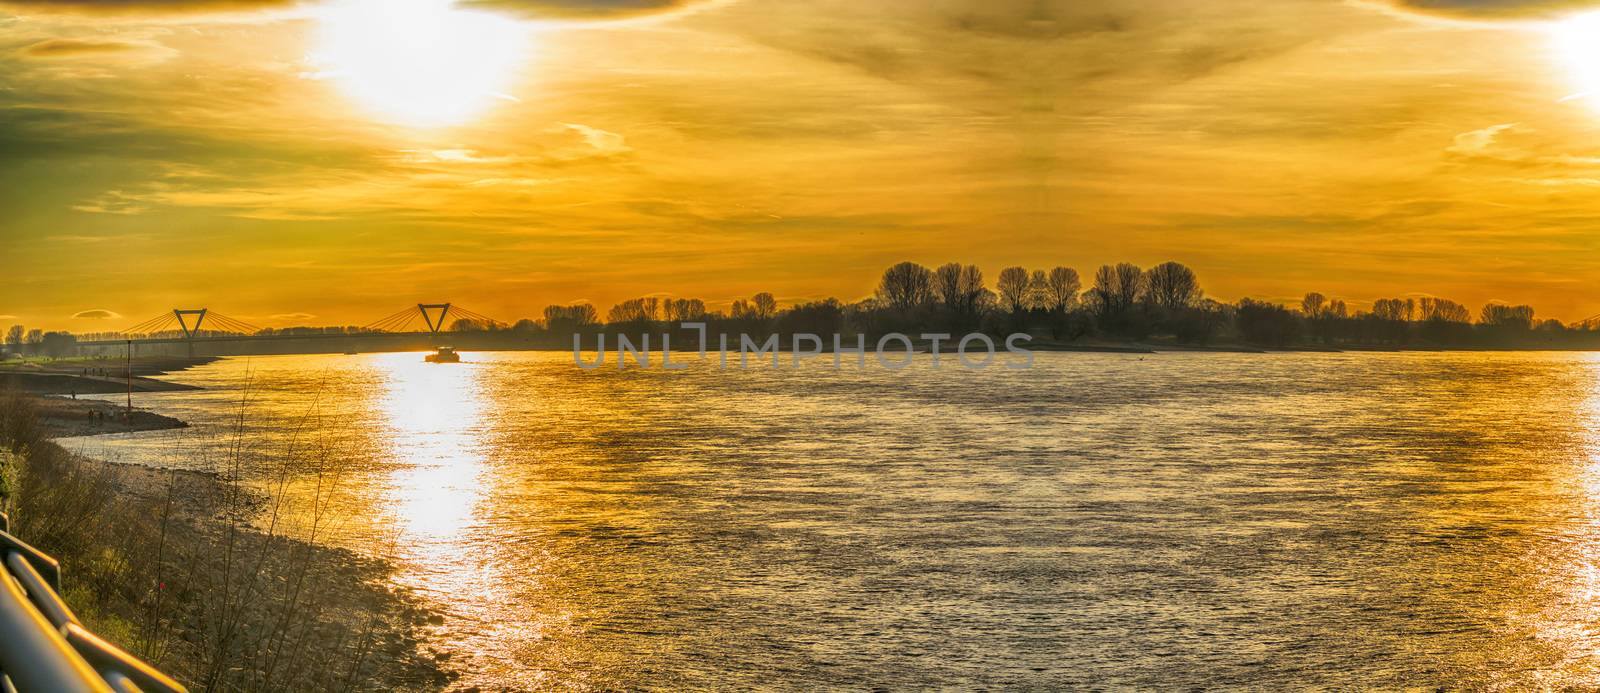 Artistic work of my own. HDR processing.
Panoramic romantic sunset over the Rhein.